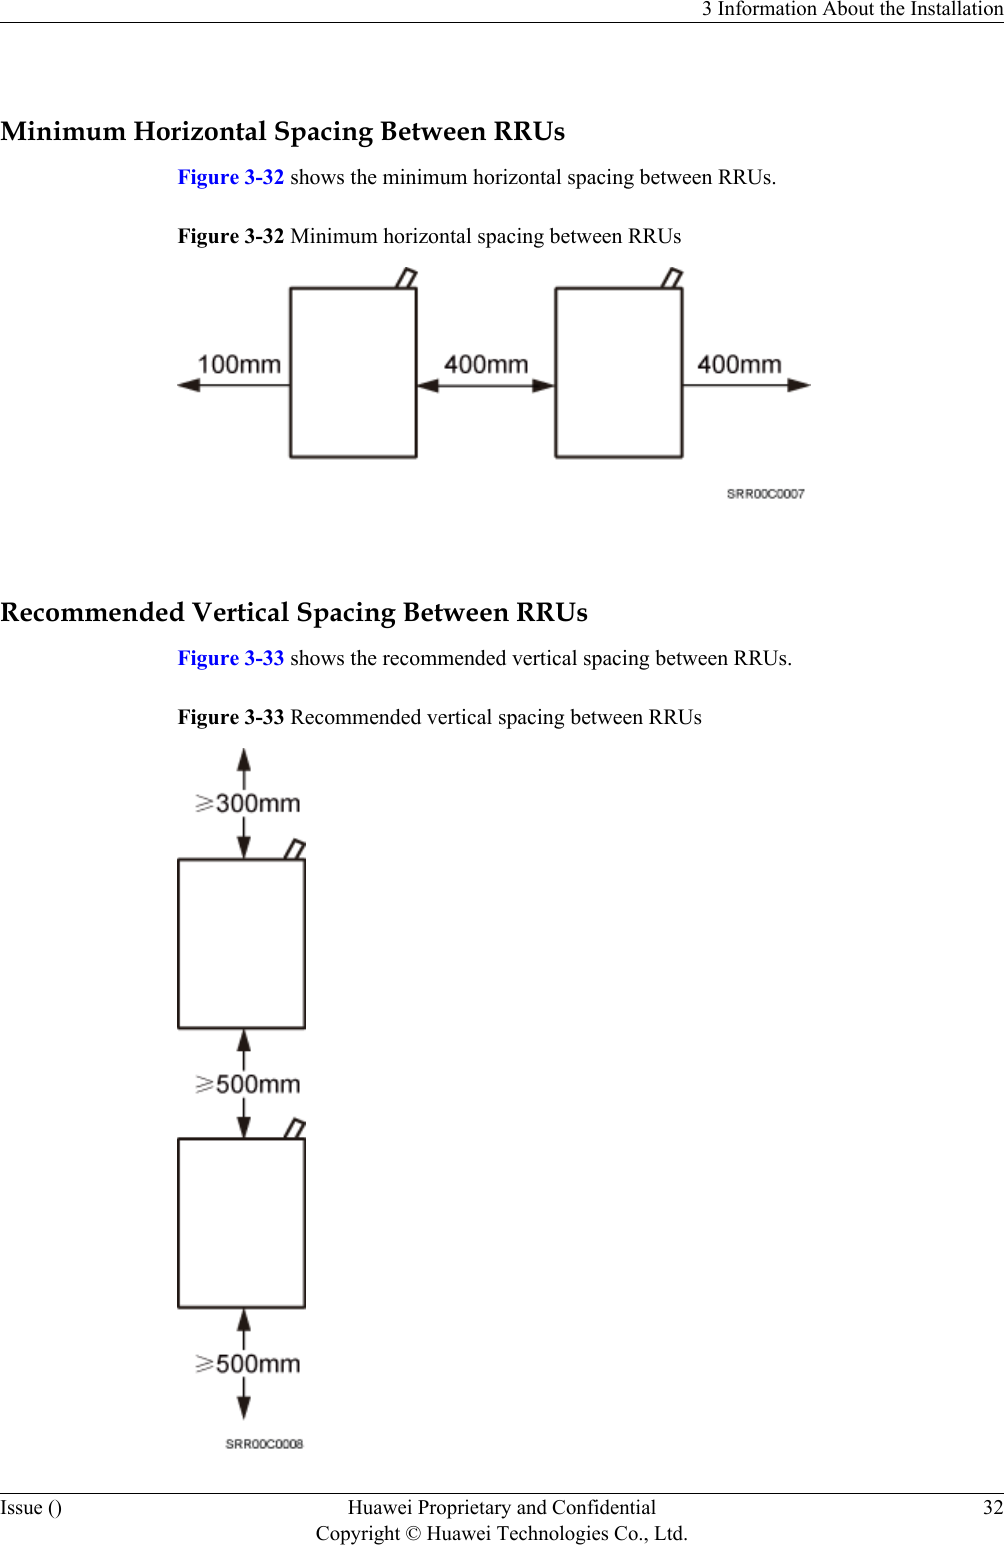  Minimum Horizontal Spacing Between RRUsFigure 3-32 shows the minimum horizontal spacing between RRUs.Figure 3-32 Minimum horizontal spacing between RRUs Recommended Vertical Spacing Between RRUsFigure 3-33 shows the recommended vertical spacing between RRUs.Figure 3-33 Recommended vertical spacing between RRUs3 Information About the InstallationIssue () Huawei Proprietary and ConfidentialCopyright © Huawei Technologies Co., Ltd.32